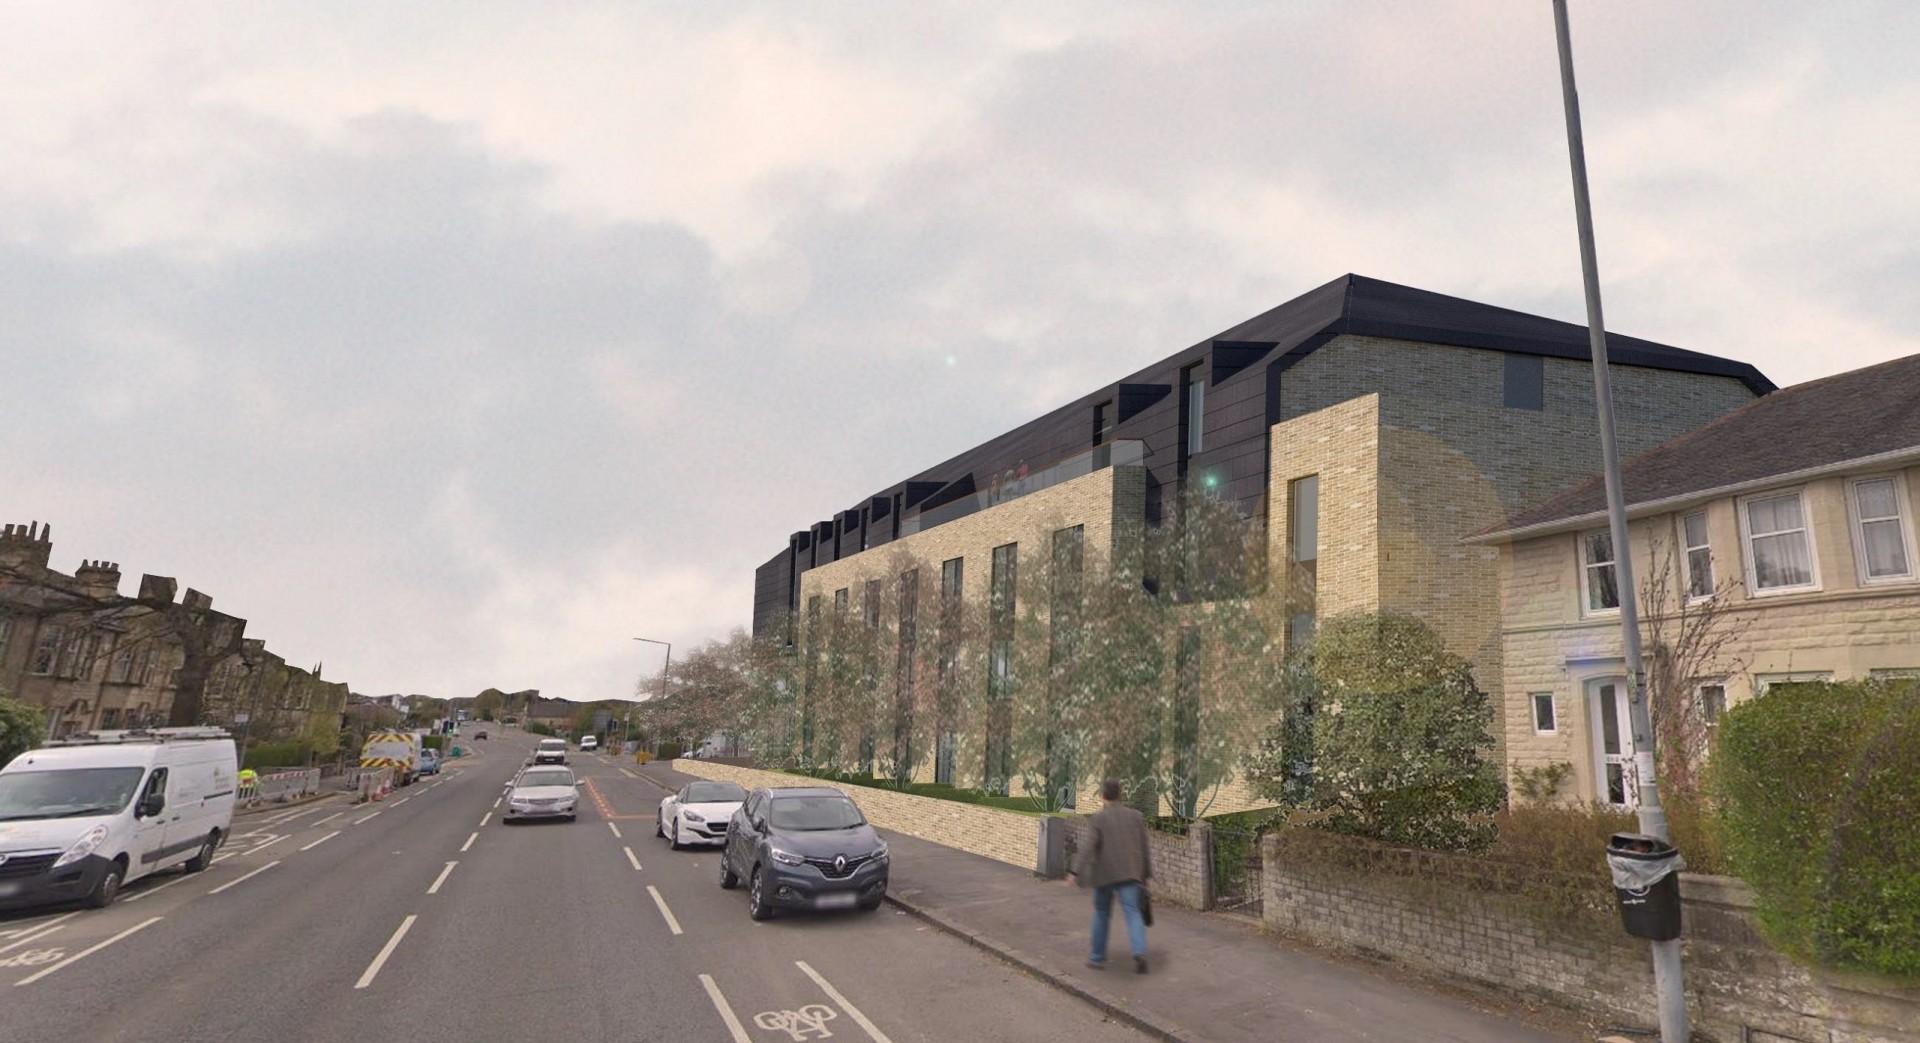 New care home proposed to replace Glasgow car showroom